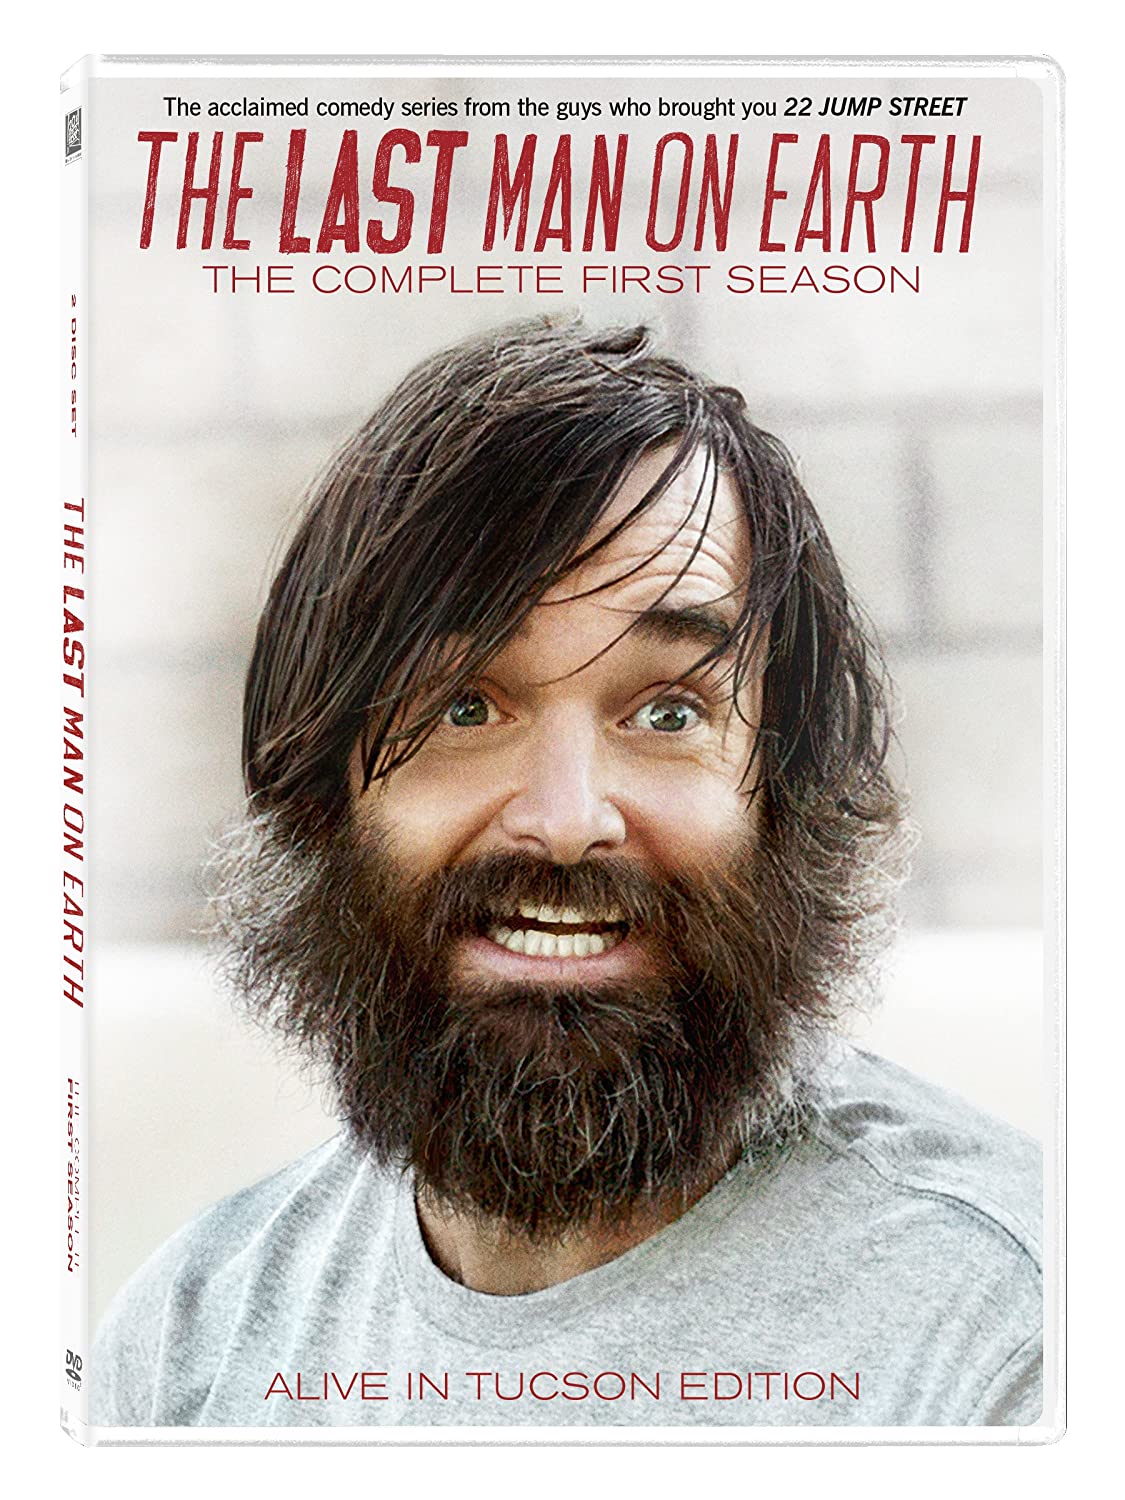 The Last Man On Earth Wallpapers